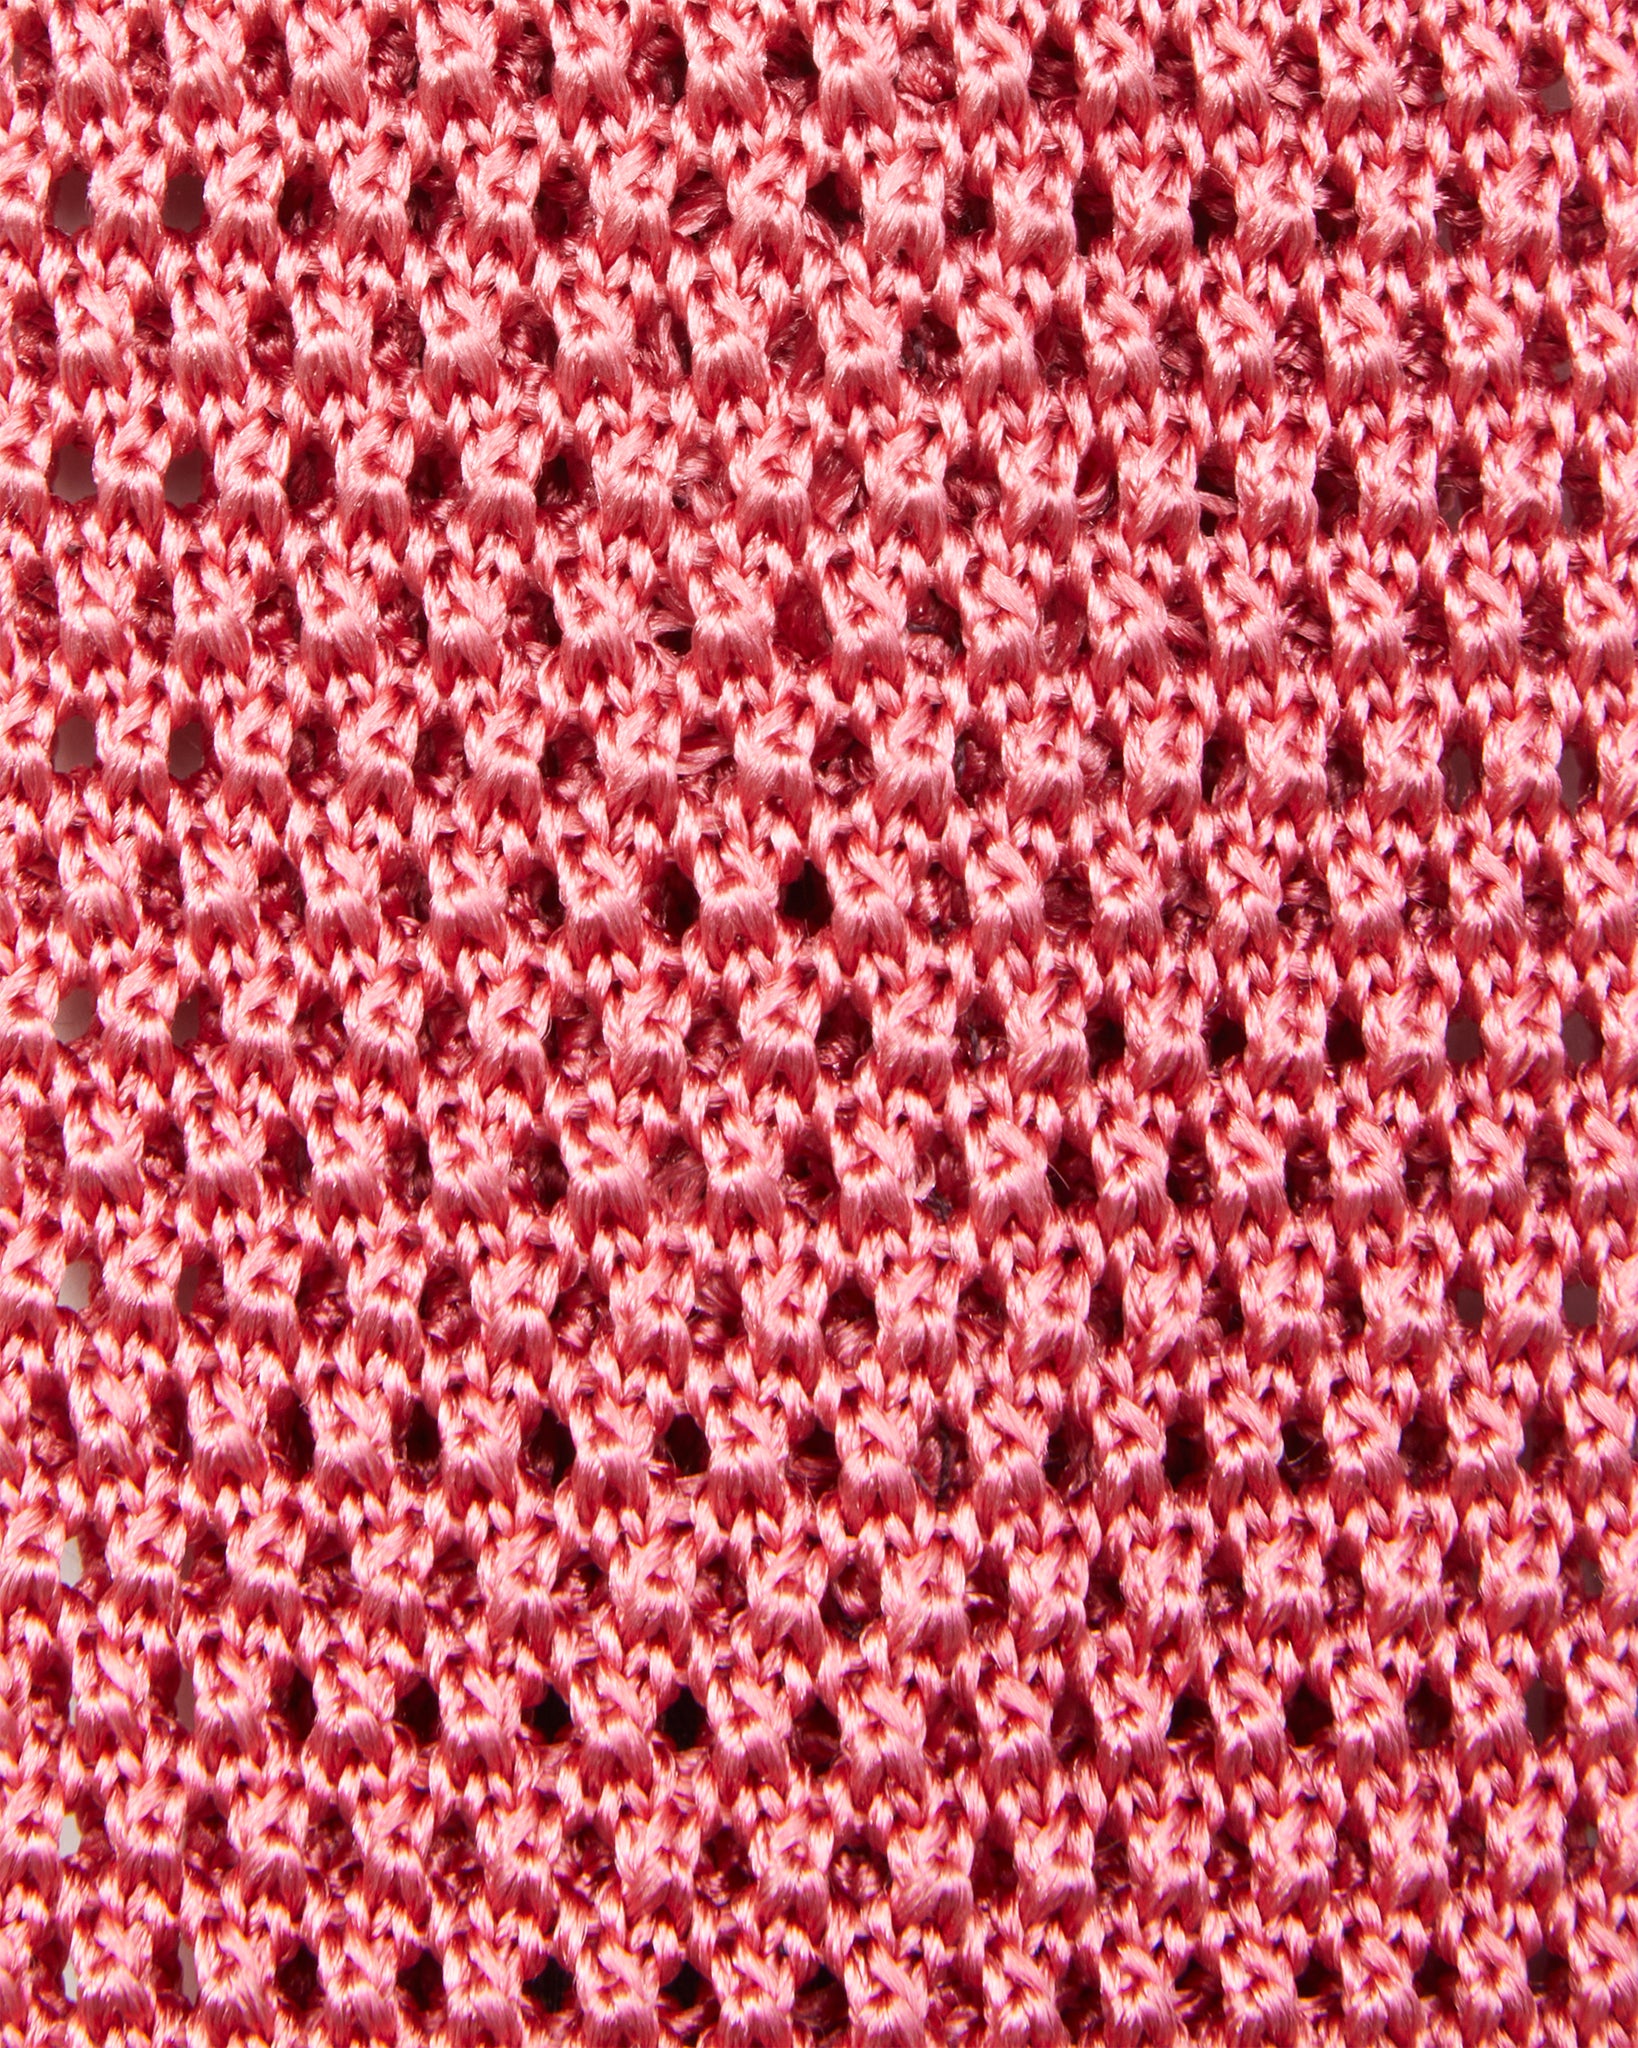 Silk Knit Tie in Coral